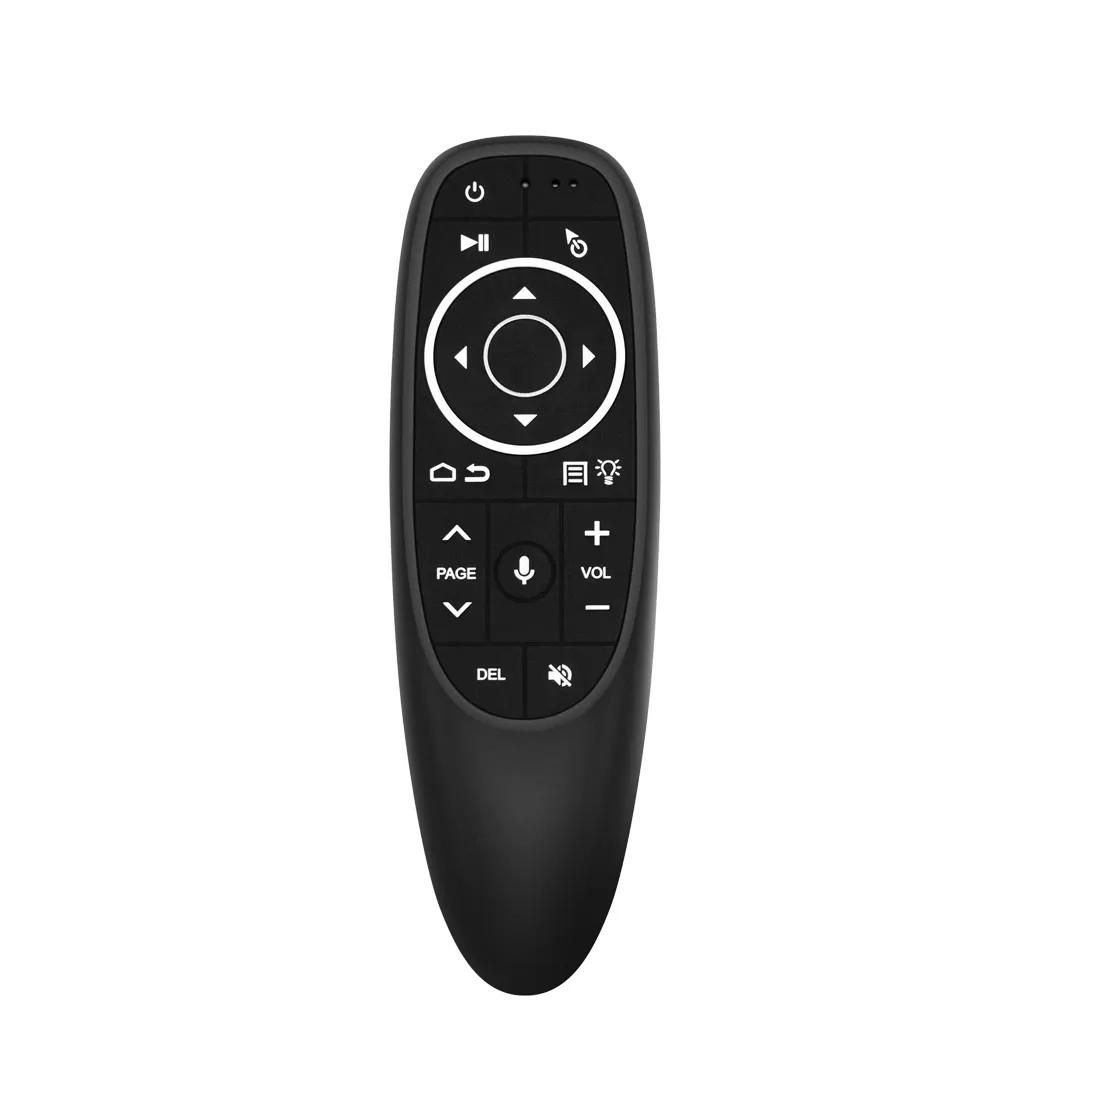 Shizhou Tech Voice Air Mouse G10S Pro with USB 2.4GHz Wireless Remote Control backlit